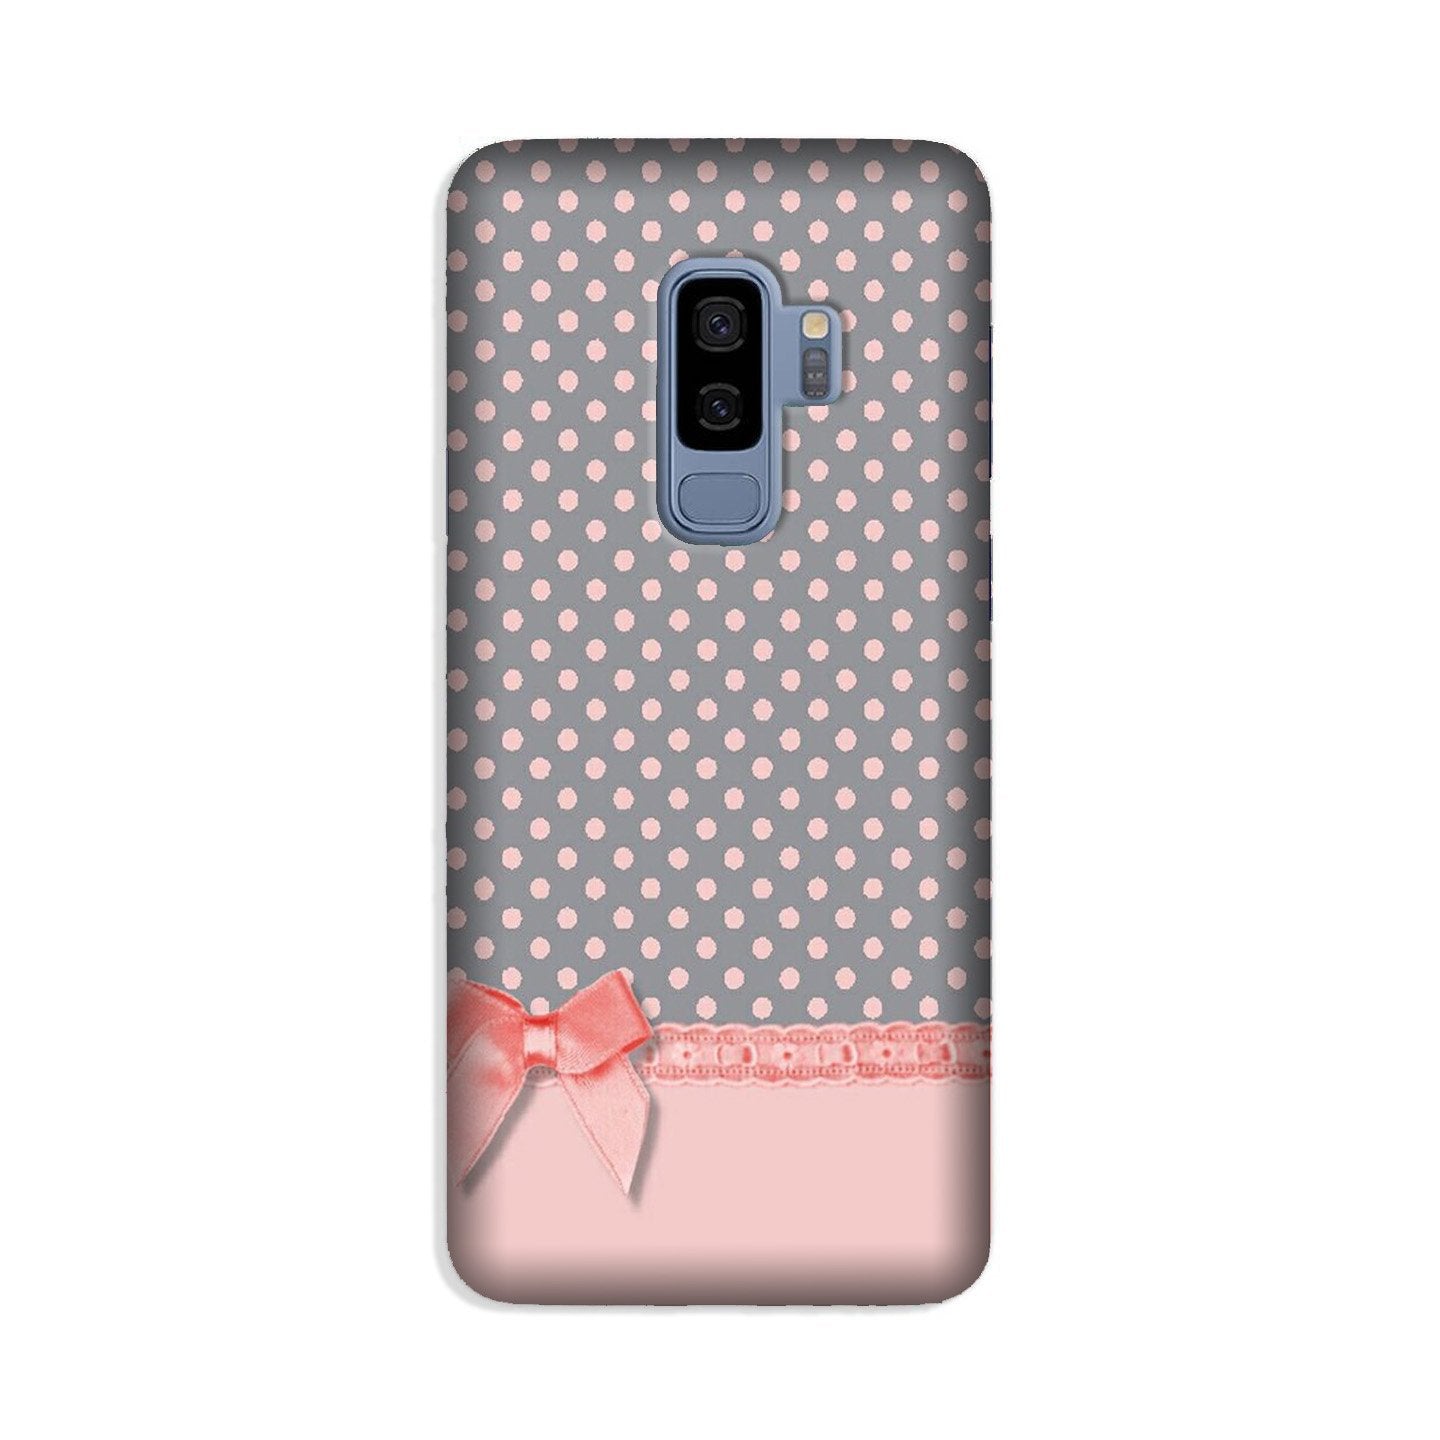 Gift Wrap2 Case for Galaxy S9 Plus